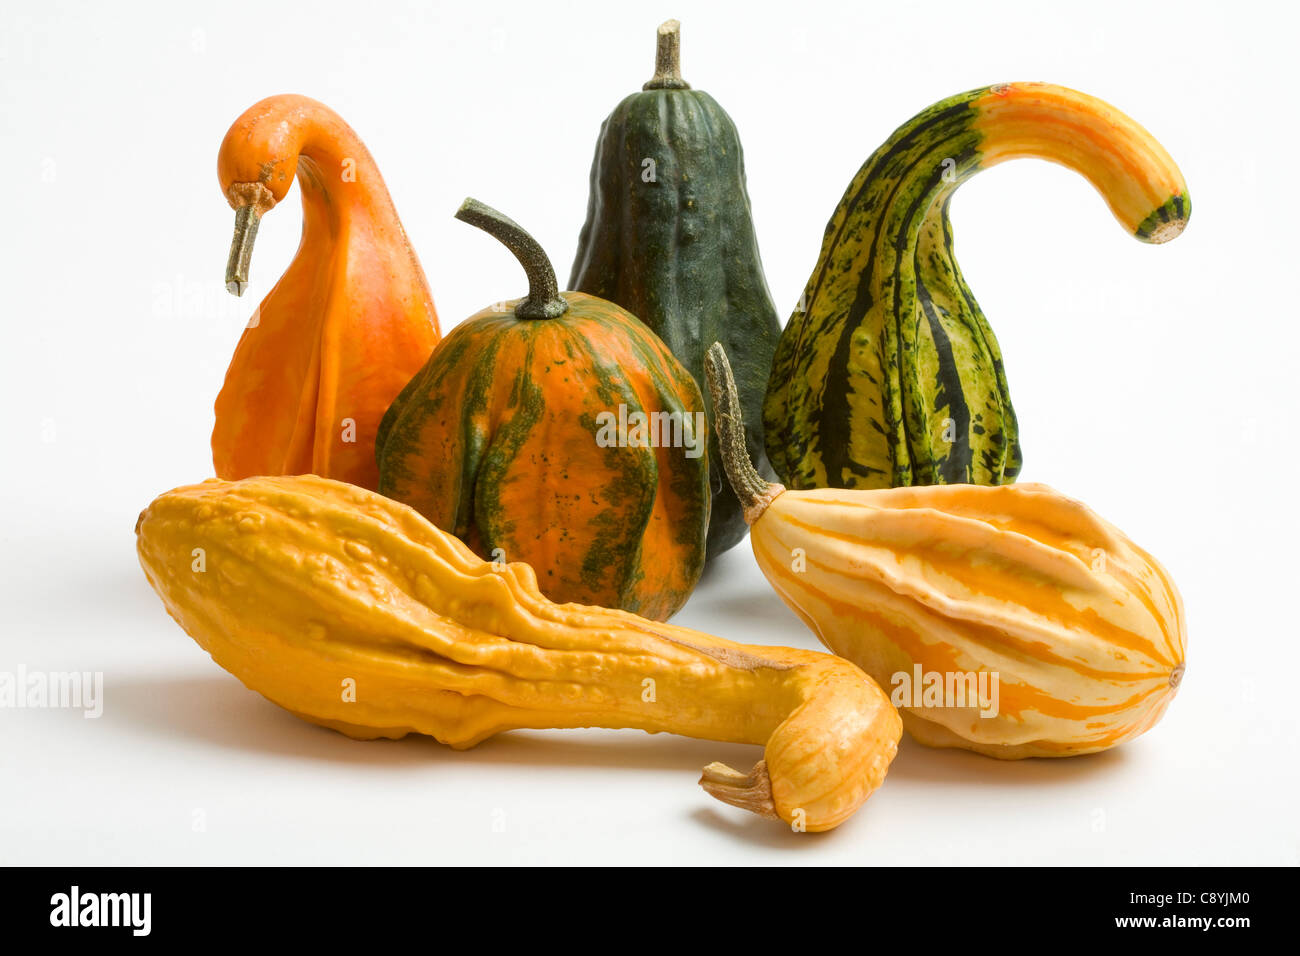 Ornamental Fruit Gourds or Squashes Stock Photo